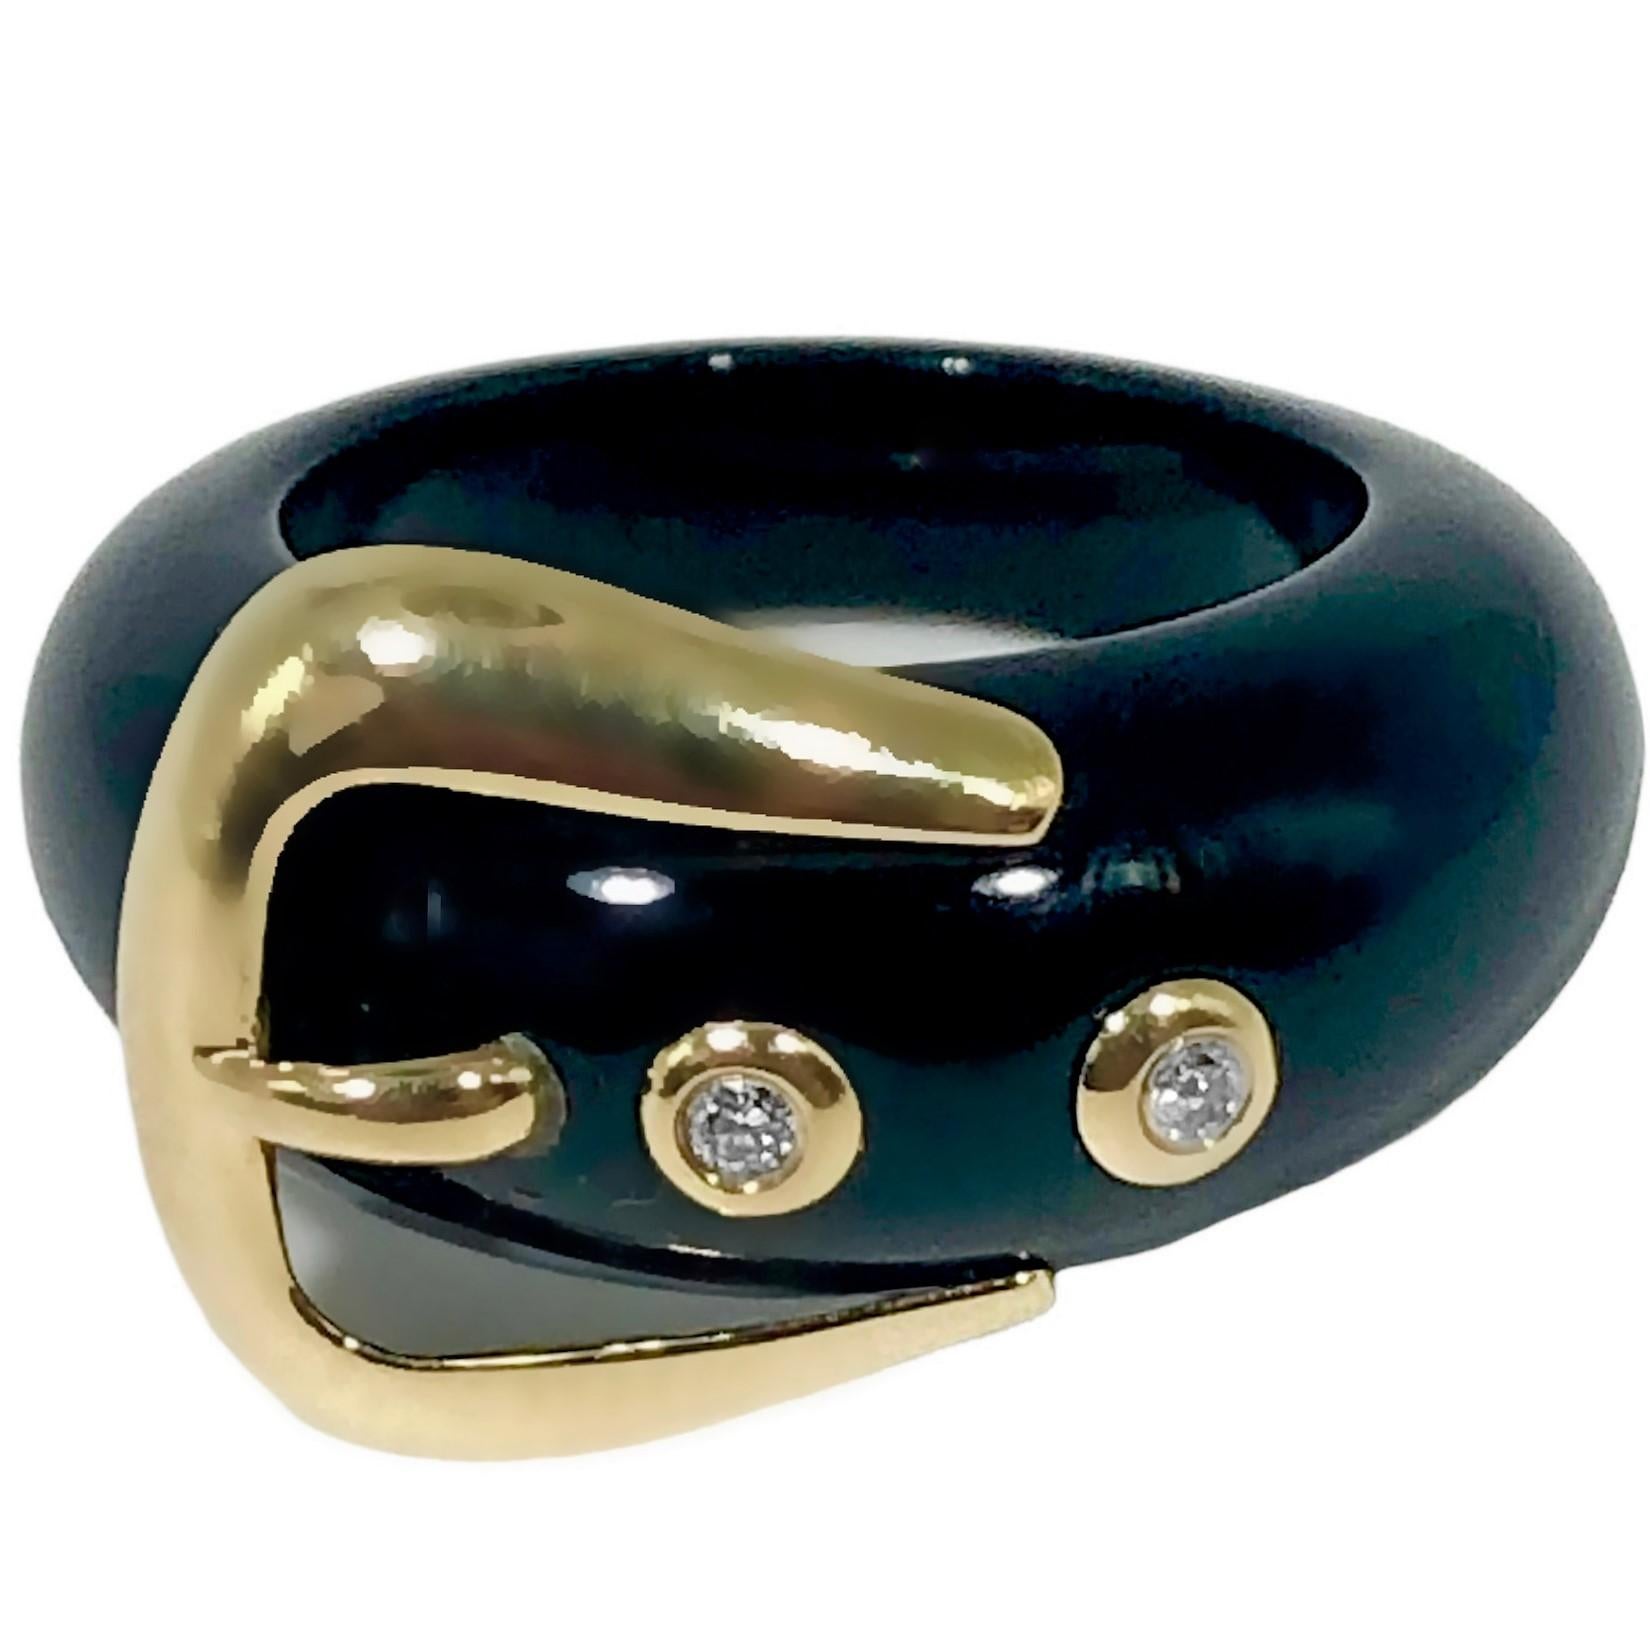 This stylish buckle ring consists of a band of black onyx, graduating from 5/16 inches at the front down to 1/8 inches at the rear.  Affixed to this band are a 14k yellow gold buckle and two individual, gold bezel set brilliant cut diamonds, with a